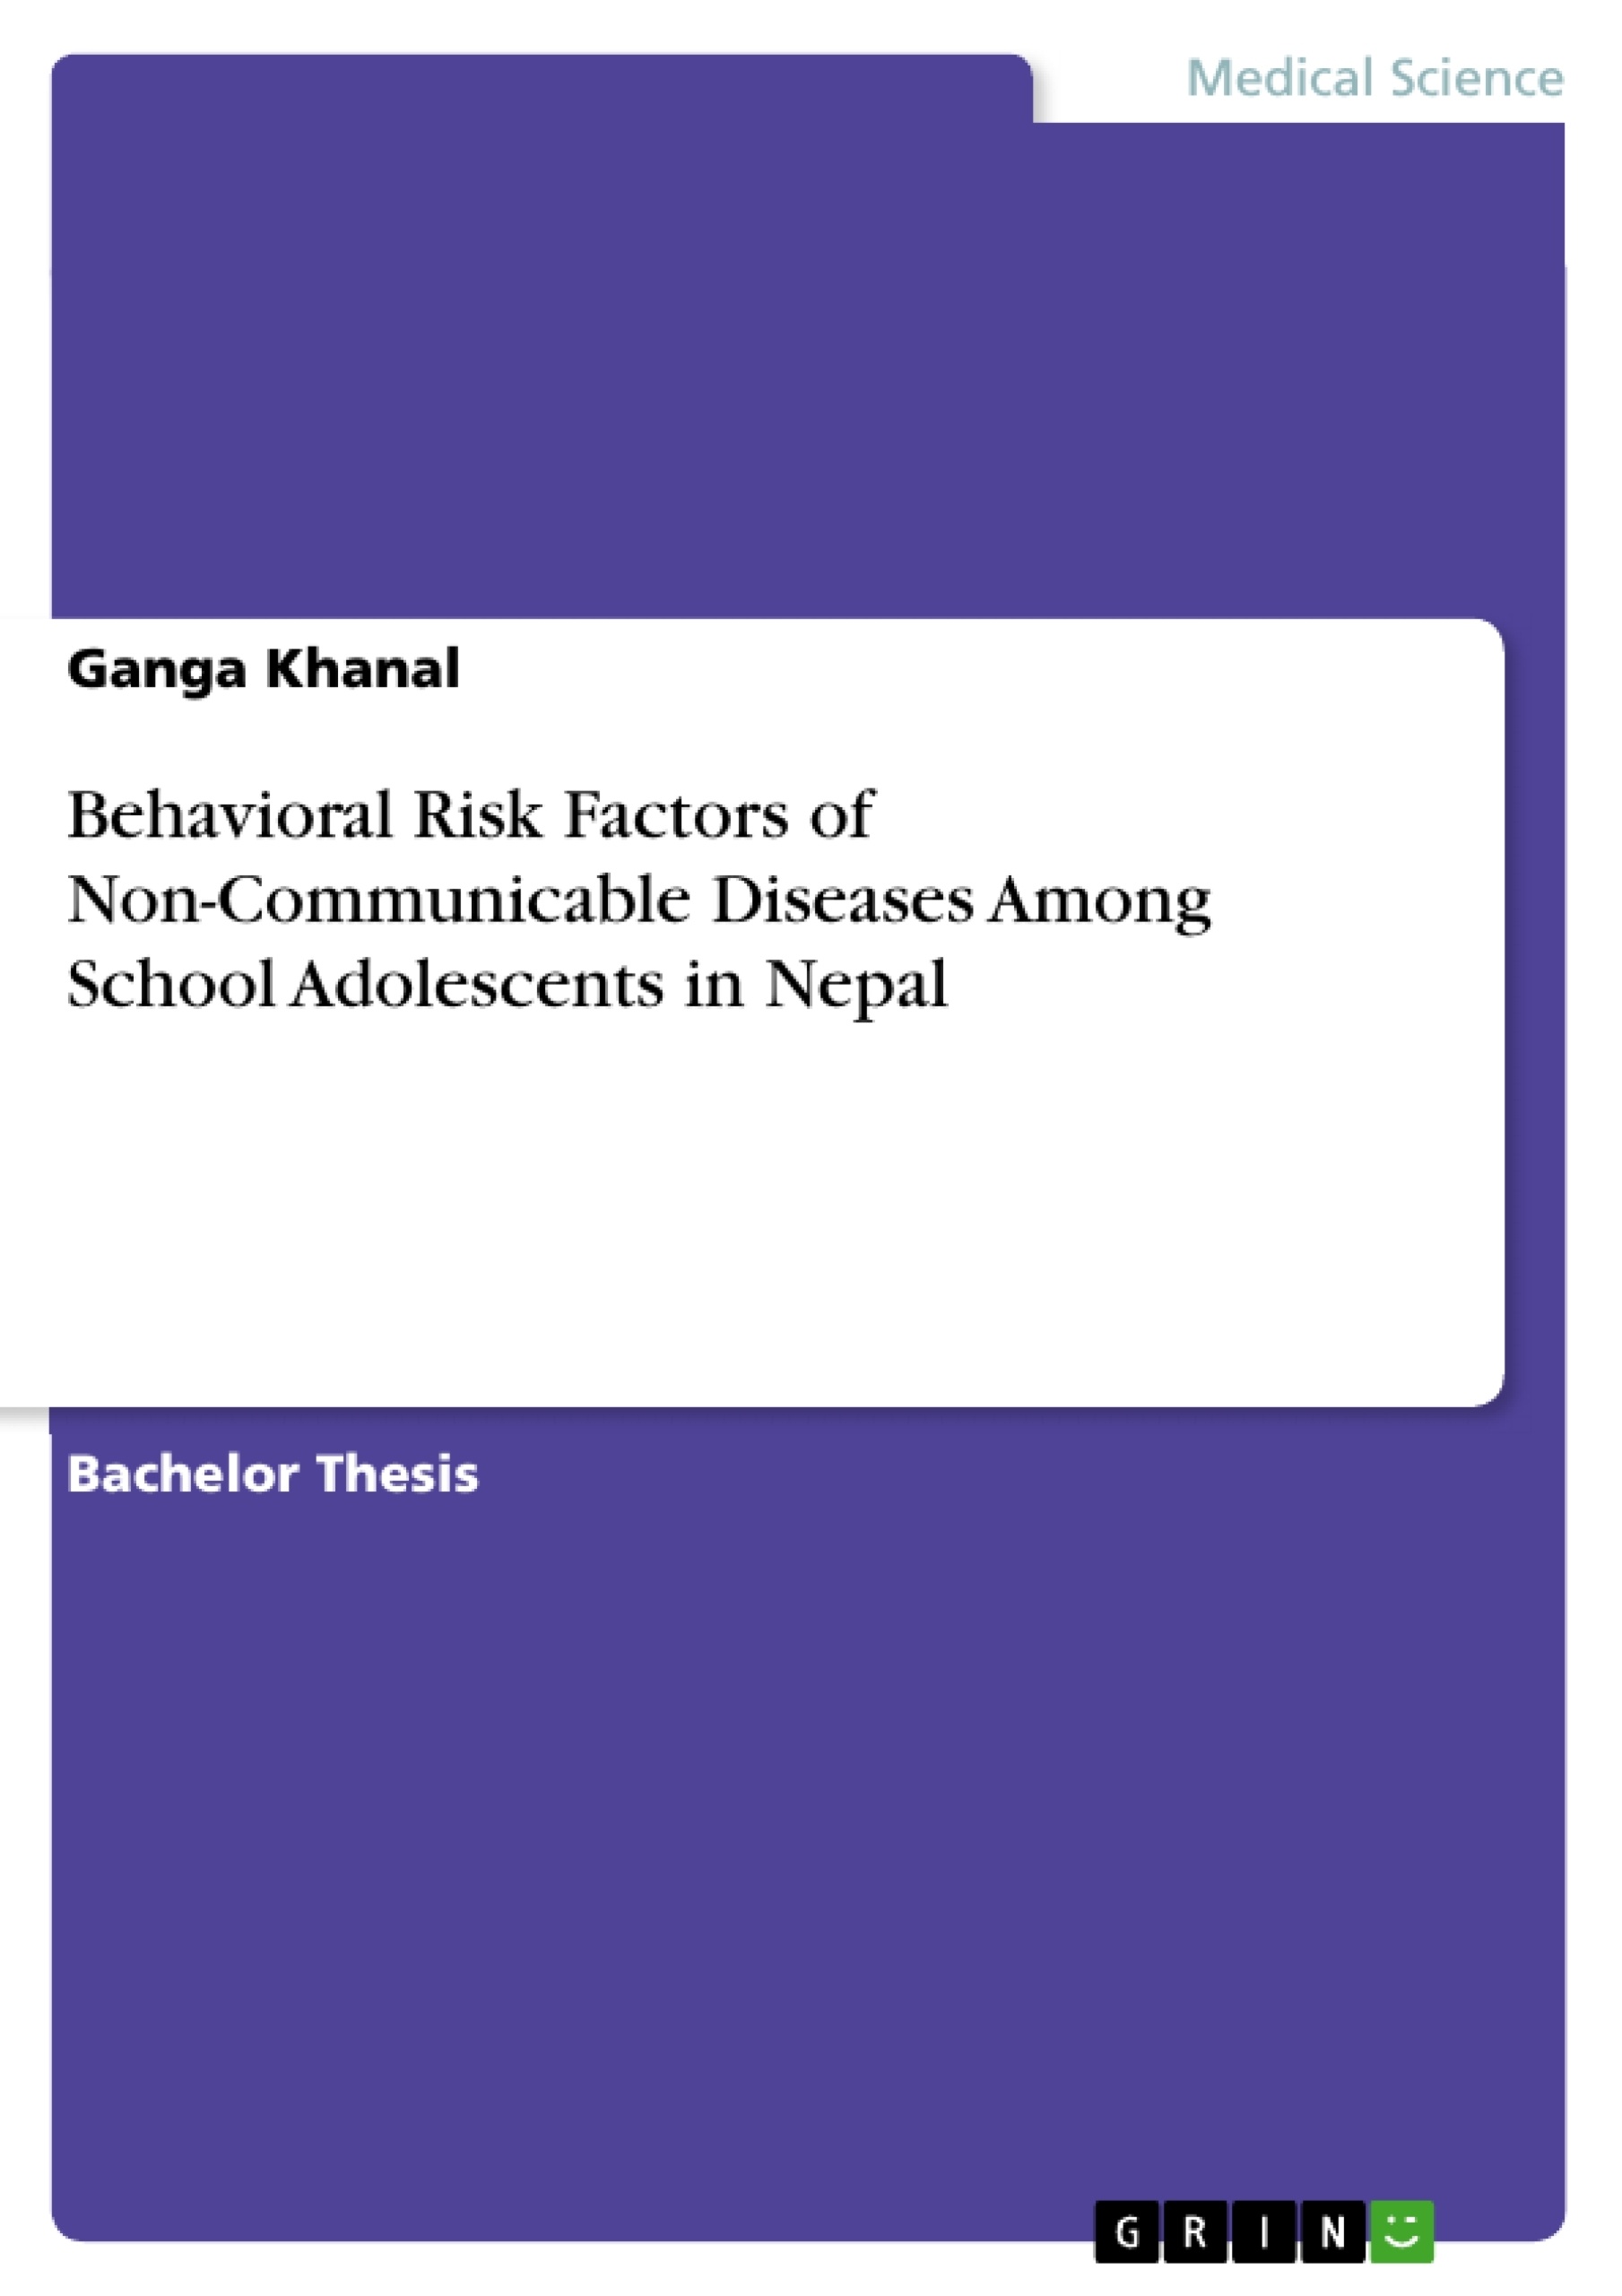 Titre: Behavioral Risk Factors of Non-Communicable Diseases Among School Adolescents in Nepal